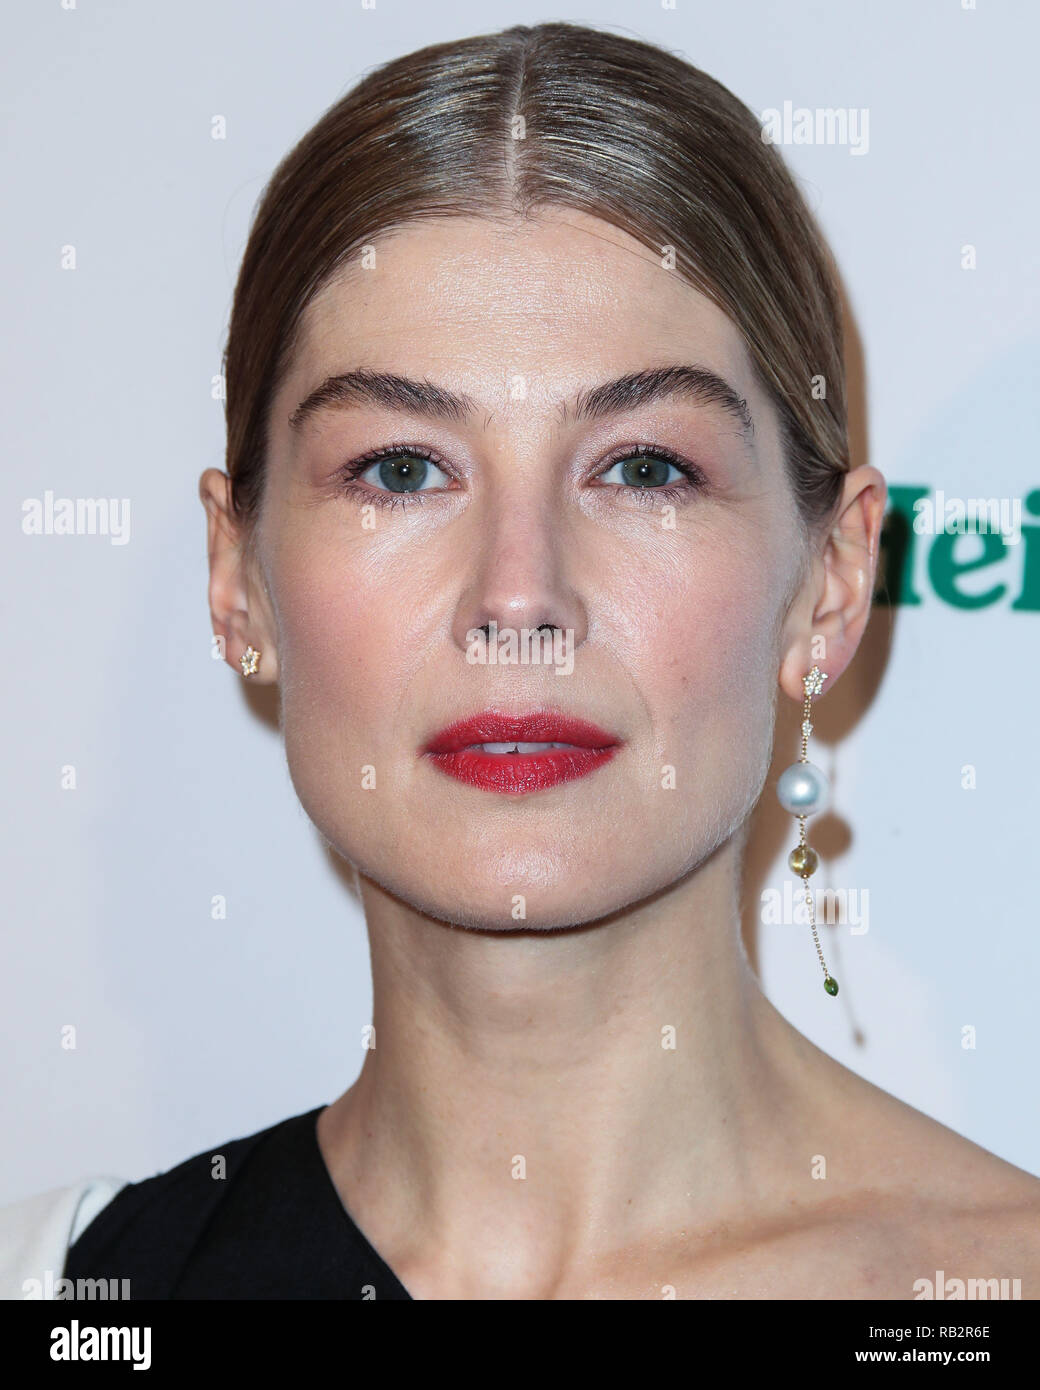 California, USA. 5th Jan 2019. Actress Rosamund Pike wearing Pierre Hardy shoes arrives at the BAFTA (British Academy of Film and Television Arts) Los Angeles Tea Party 2019 held at the Four Seasons Hotel Los Angeles at Beverly Hills on January 5, 2019 in Beverly Hills, Los Angeles, California, United States. (Photo by Xavier Collin/Image Press Agency) Credit: Image Press Agency/Alamy Live News Stock Photo